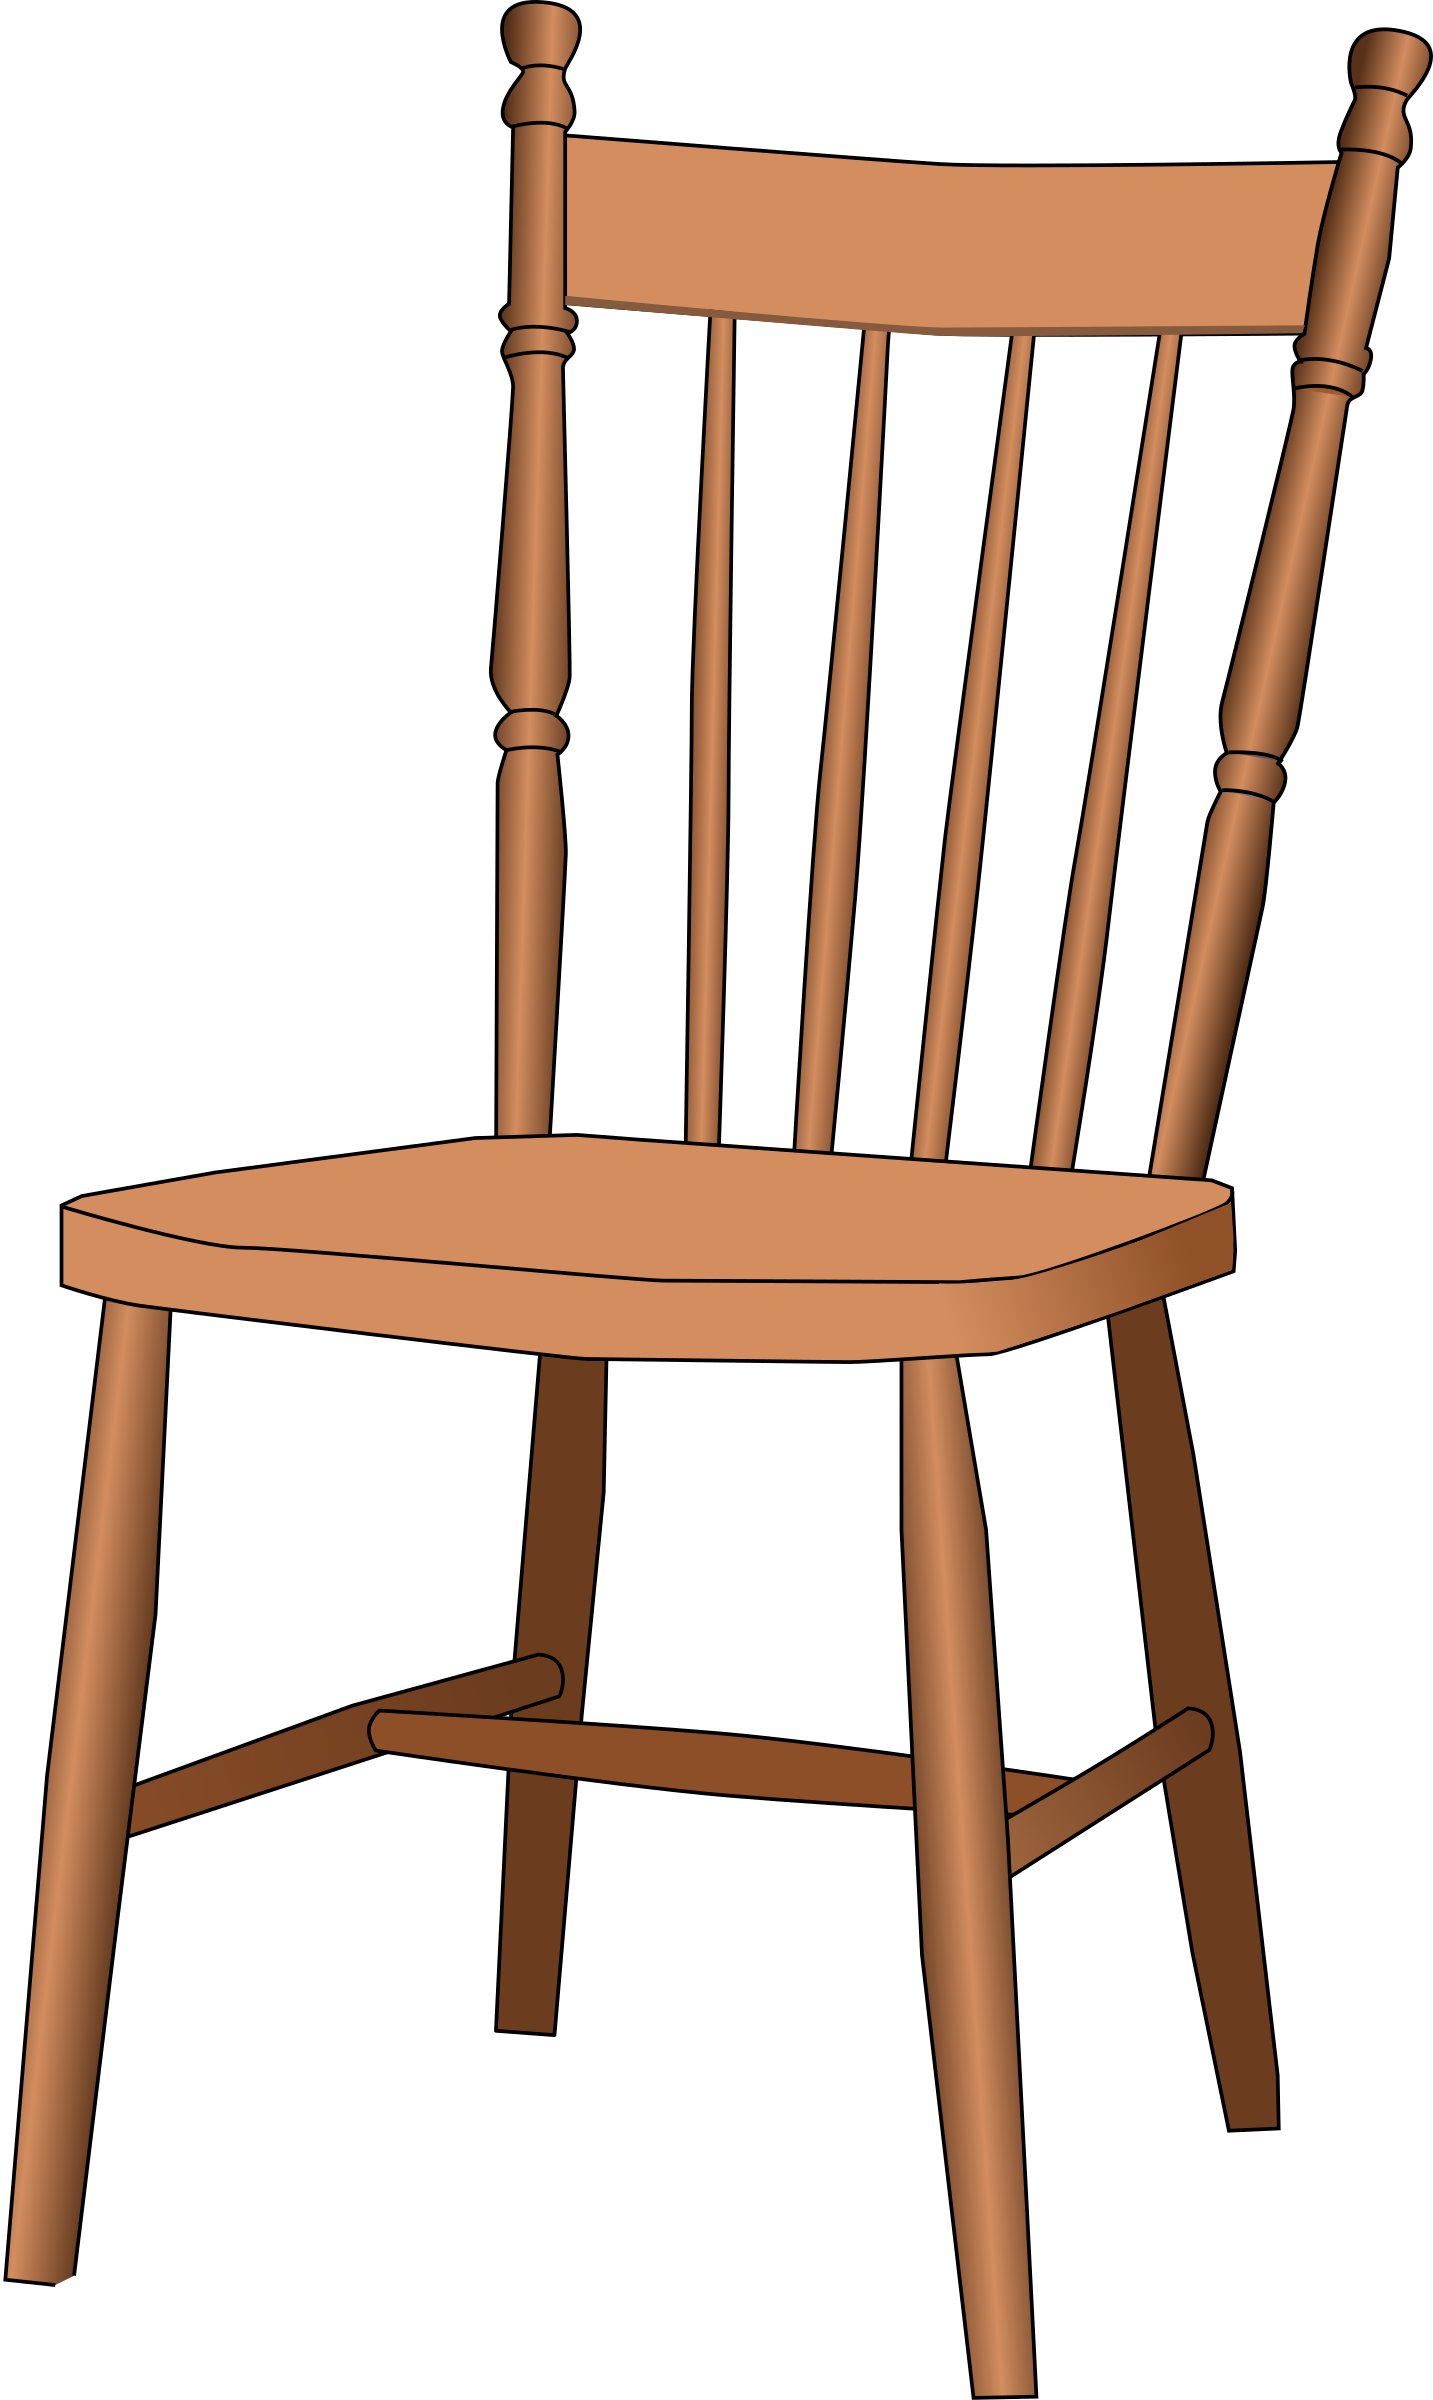 Wood Kitchen Chair Clipart Free Download Transparent